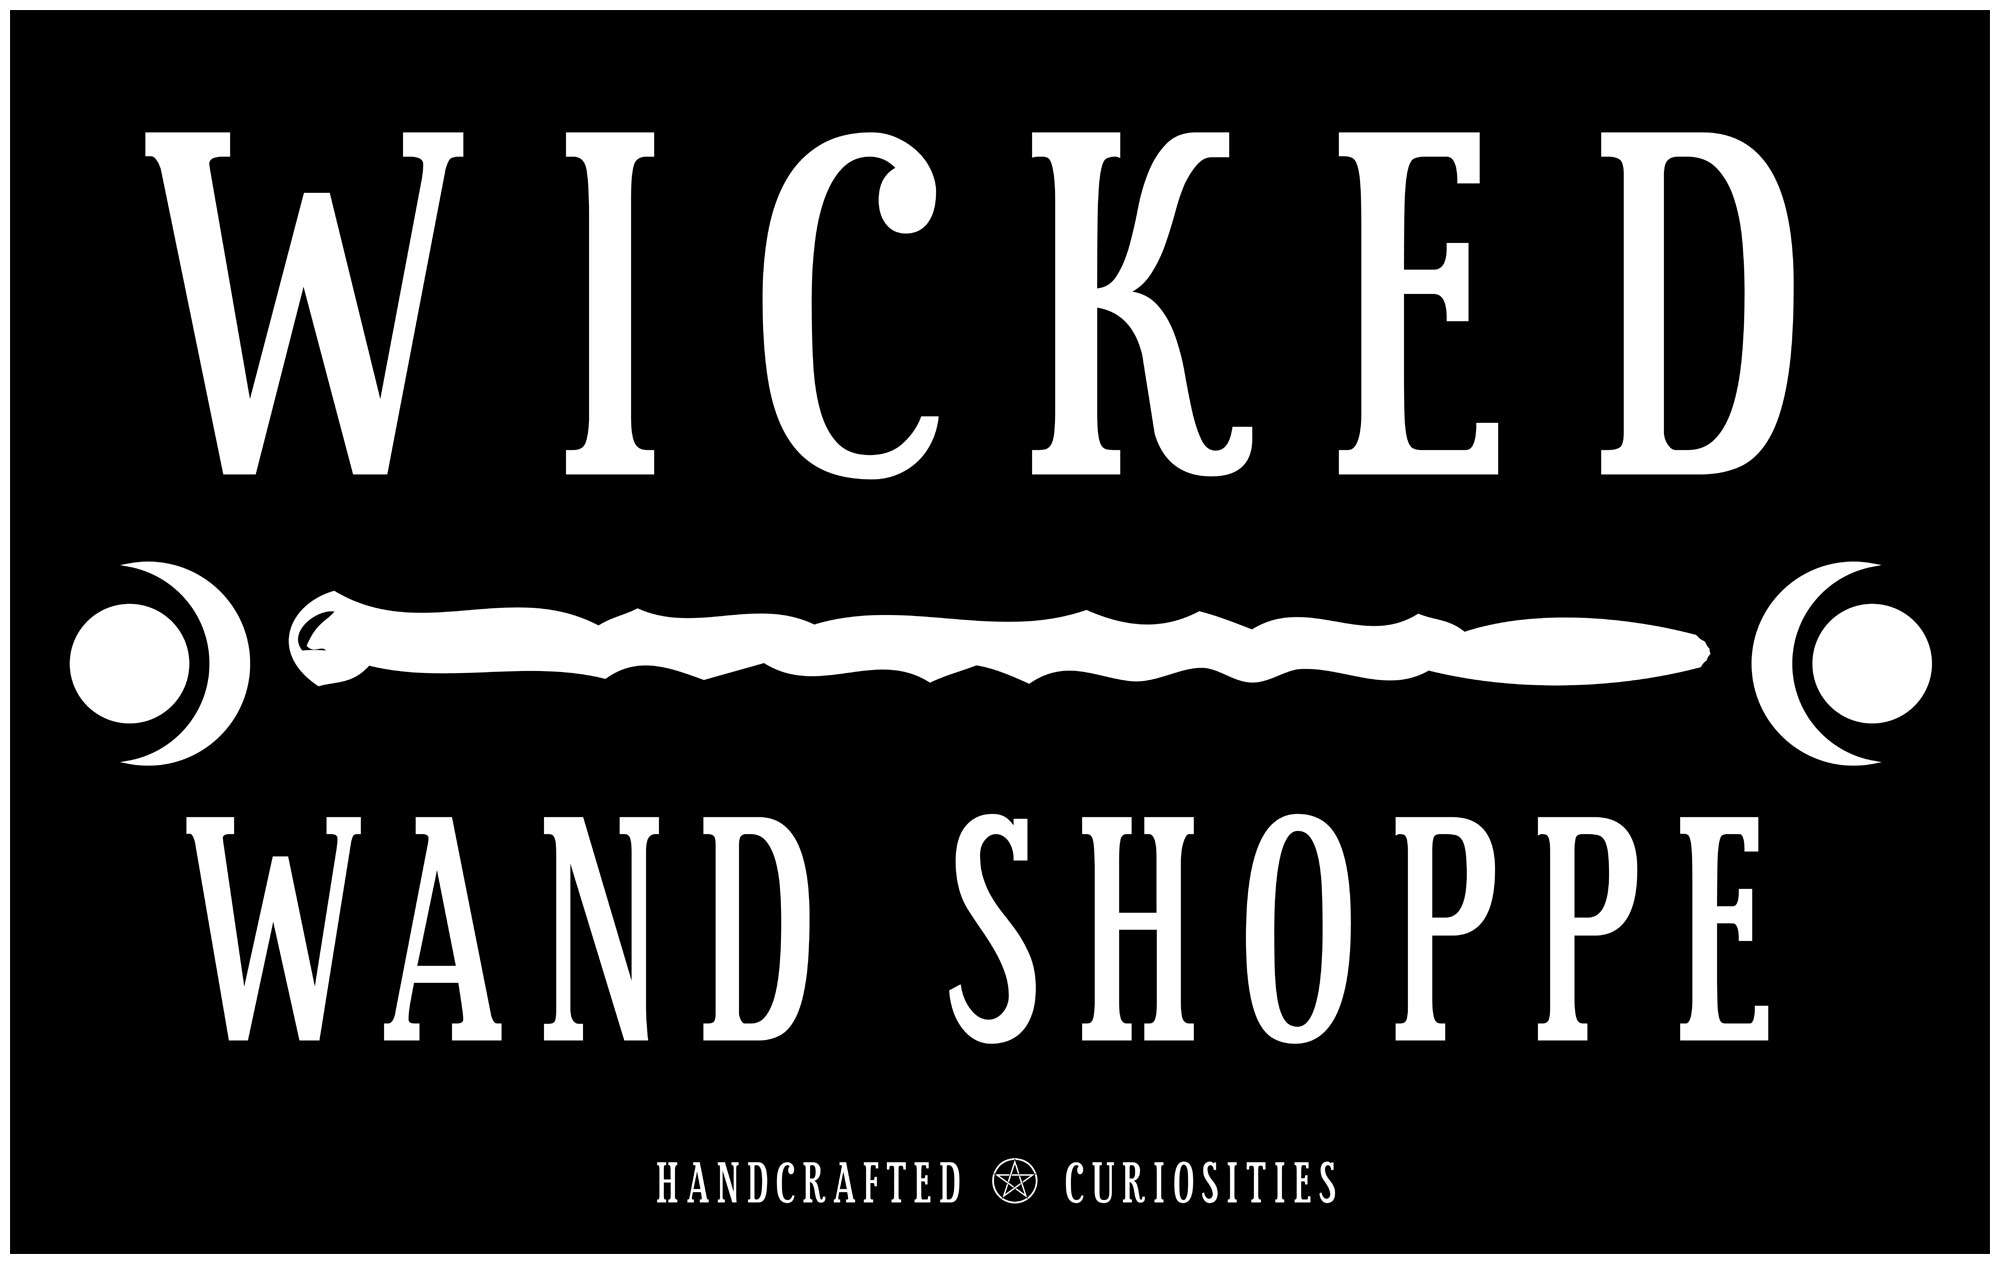 The Wicked Wand Shoppe, wicked wand, handmade curiosities, altar tools